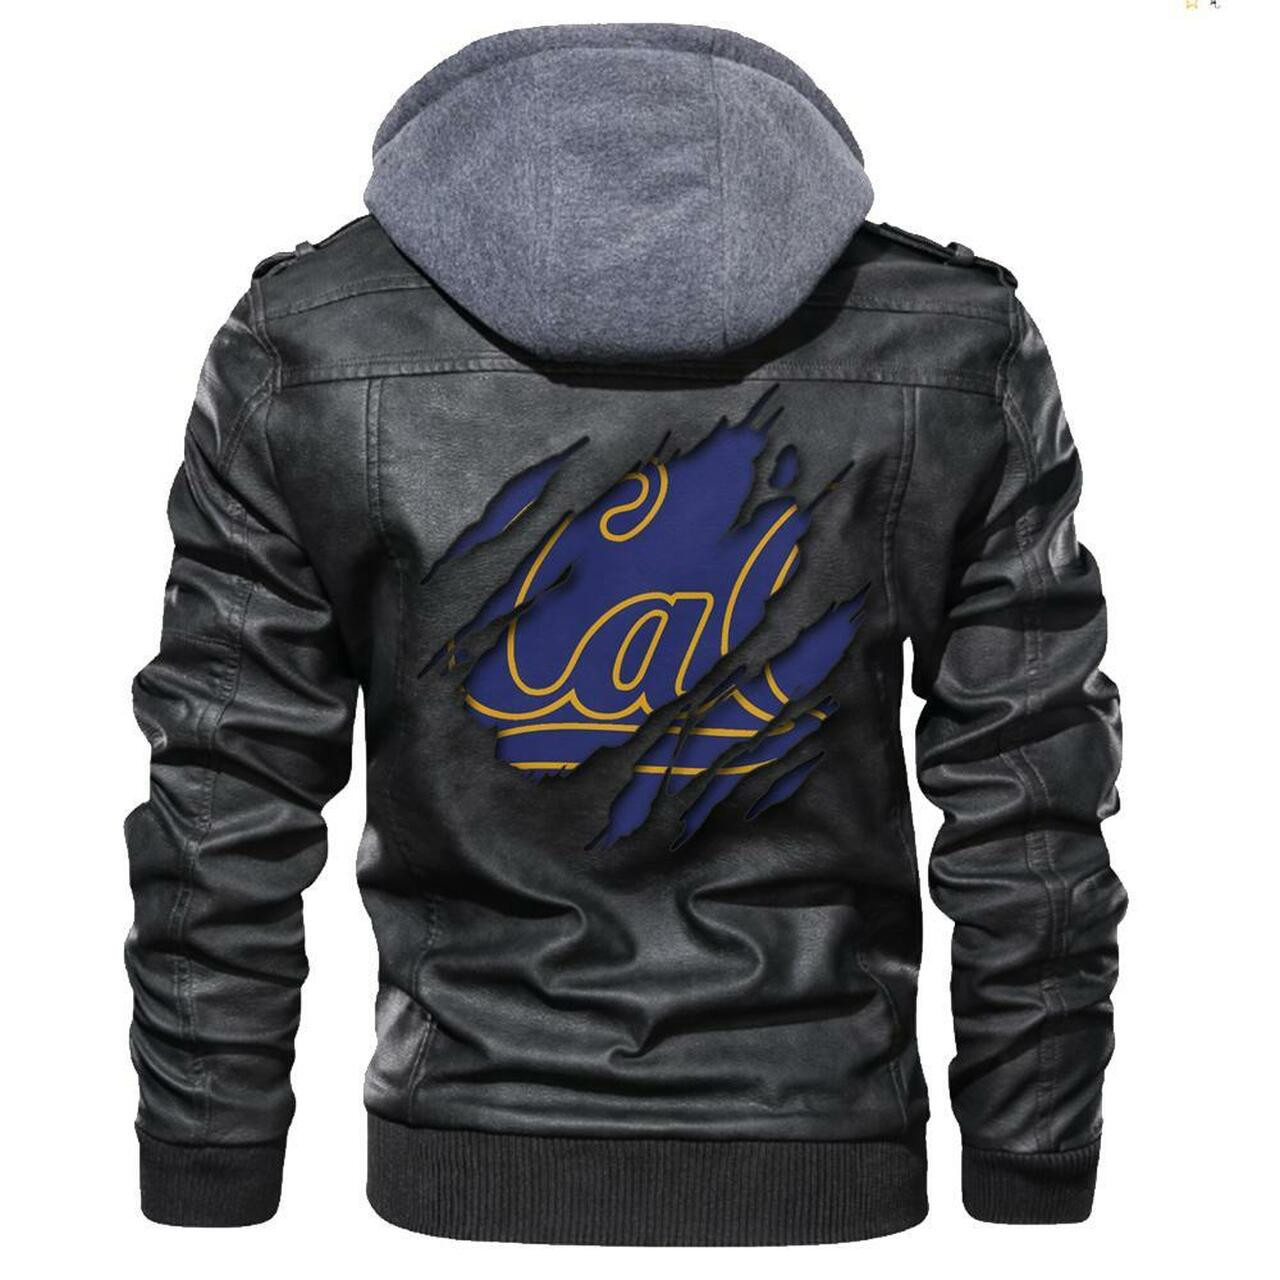 You'll have the perfect jacket in no time by clicking the link below 231